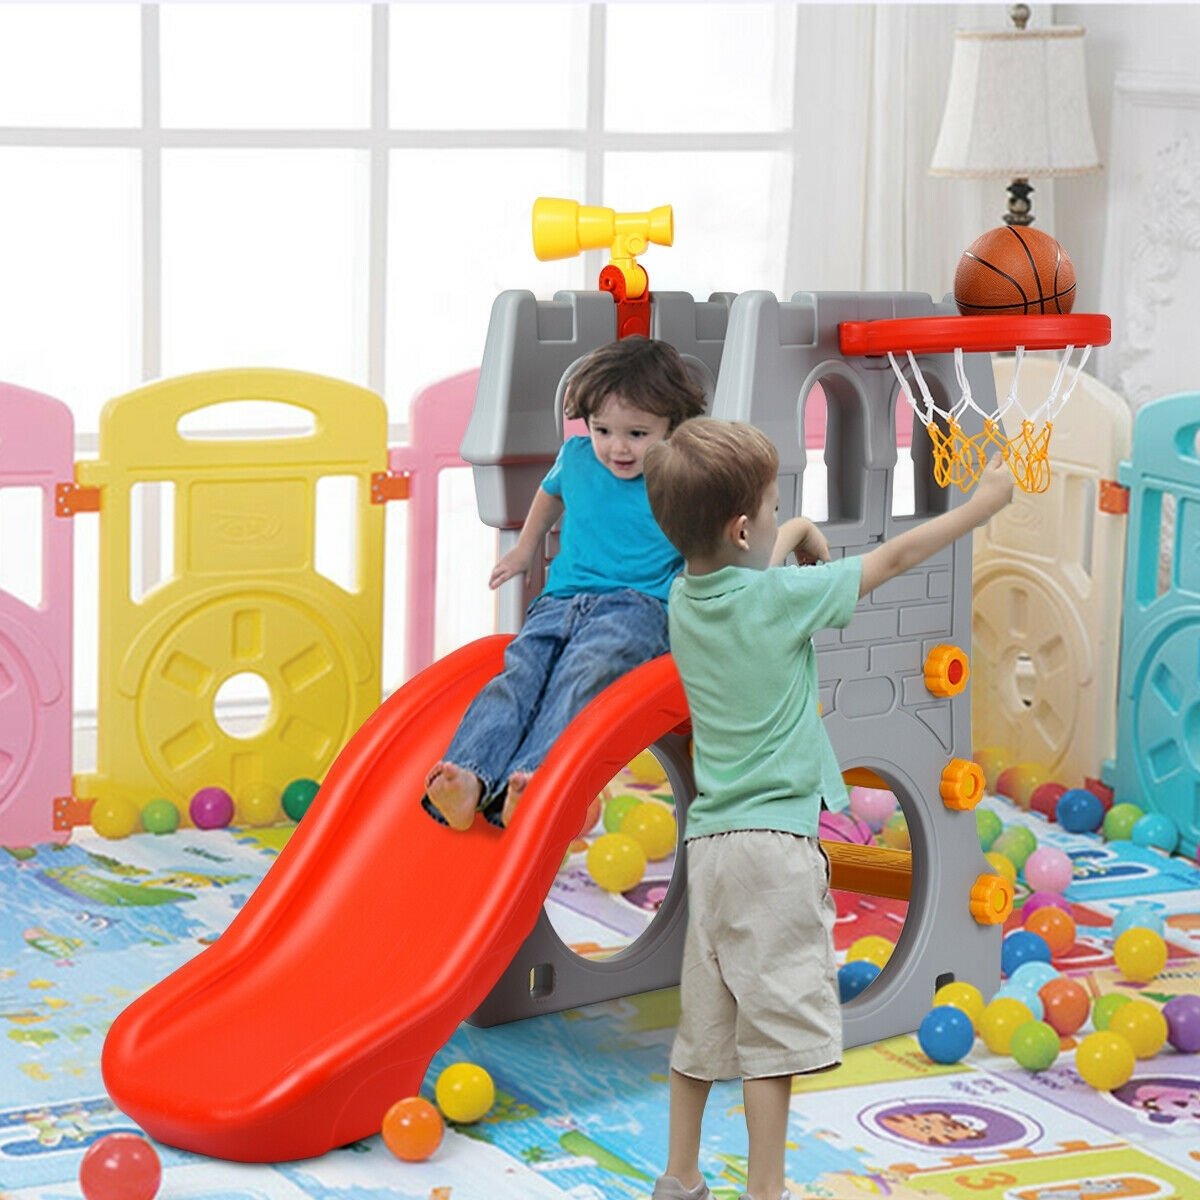 5 in 1 Toddler Climber Slide Playset with Basketball Hoop and Telescope, Multicolor